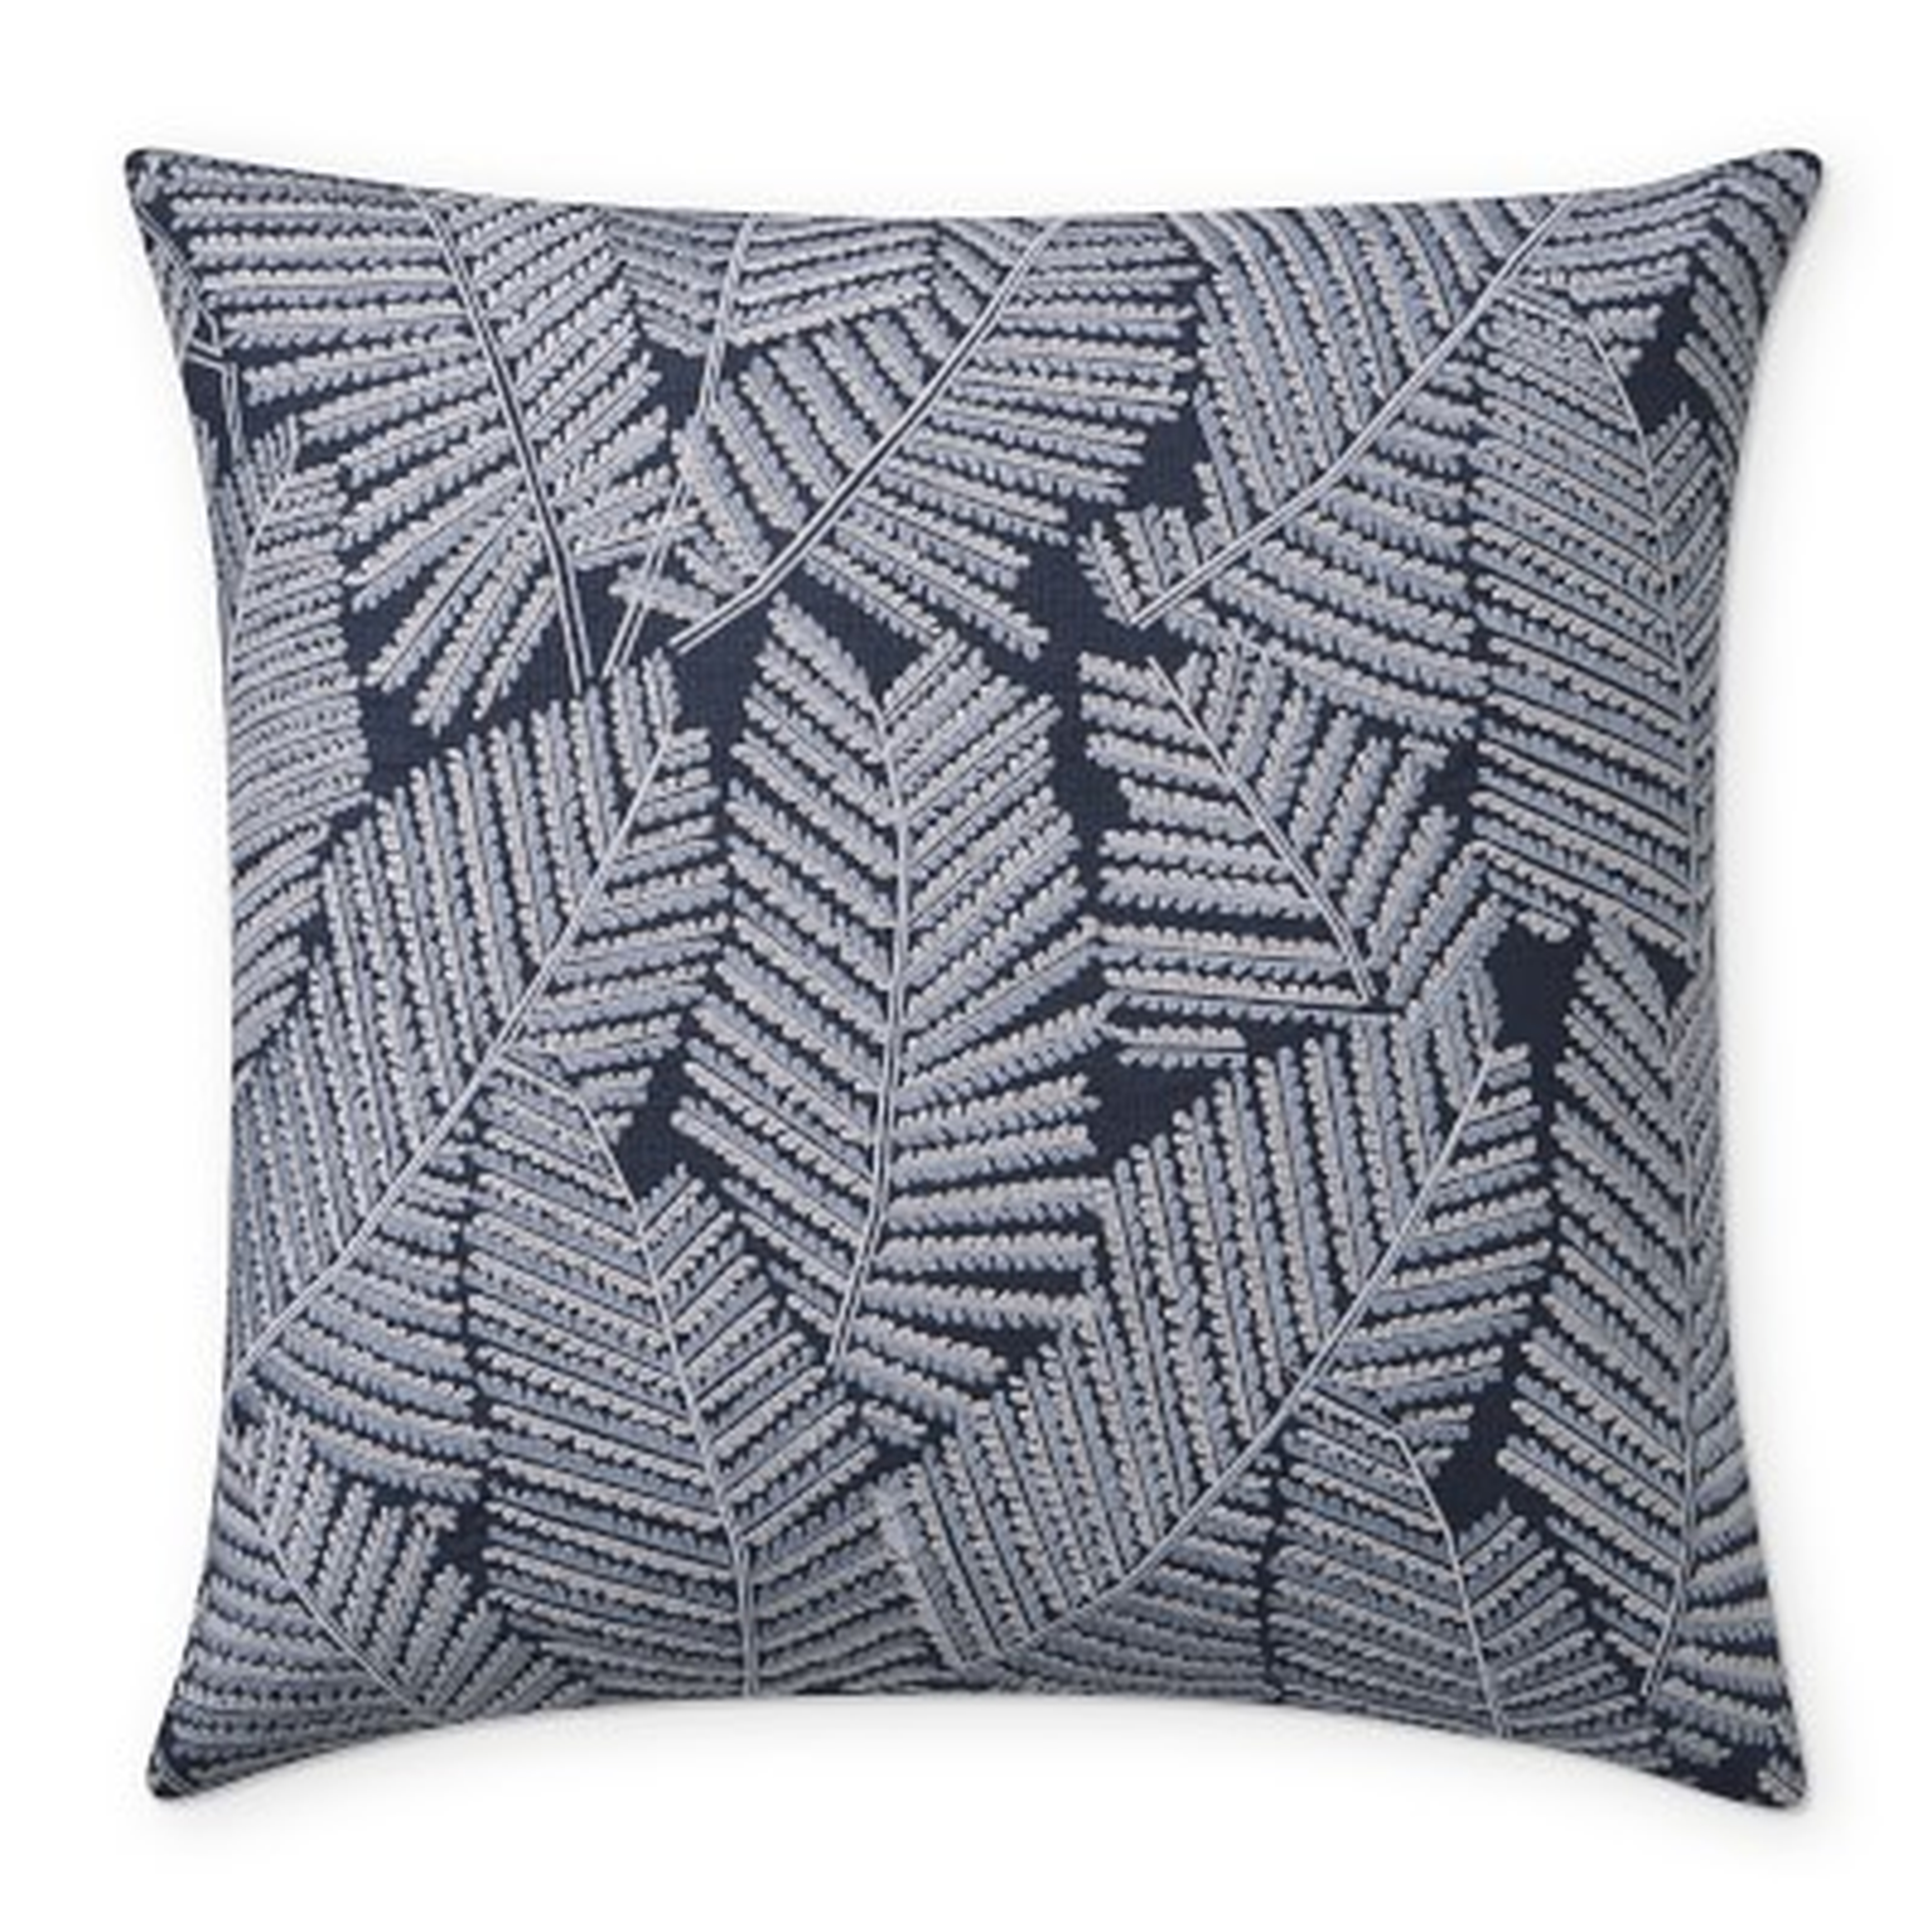 Modern Fern Embroidered Pillow Cover, 20" X 20", Navy - Williams Sonoma